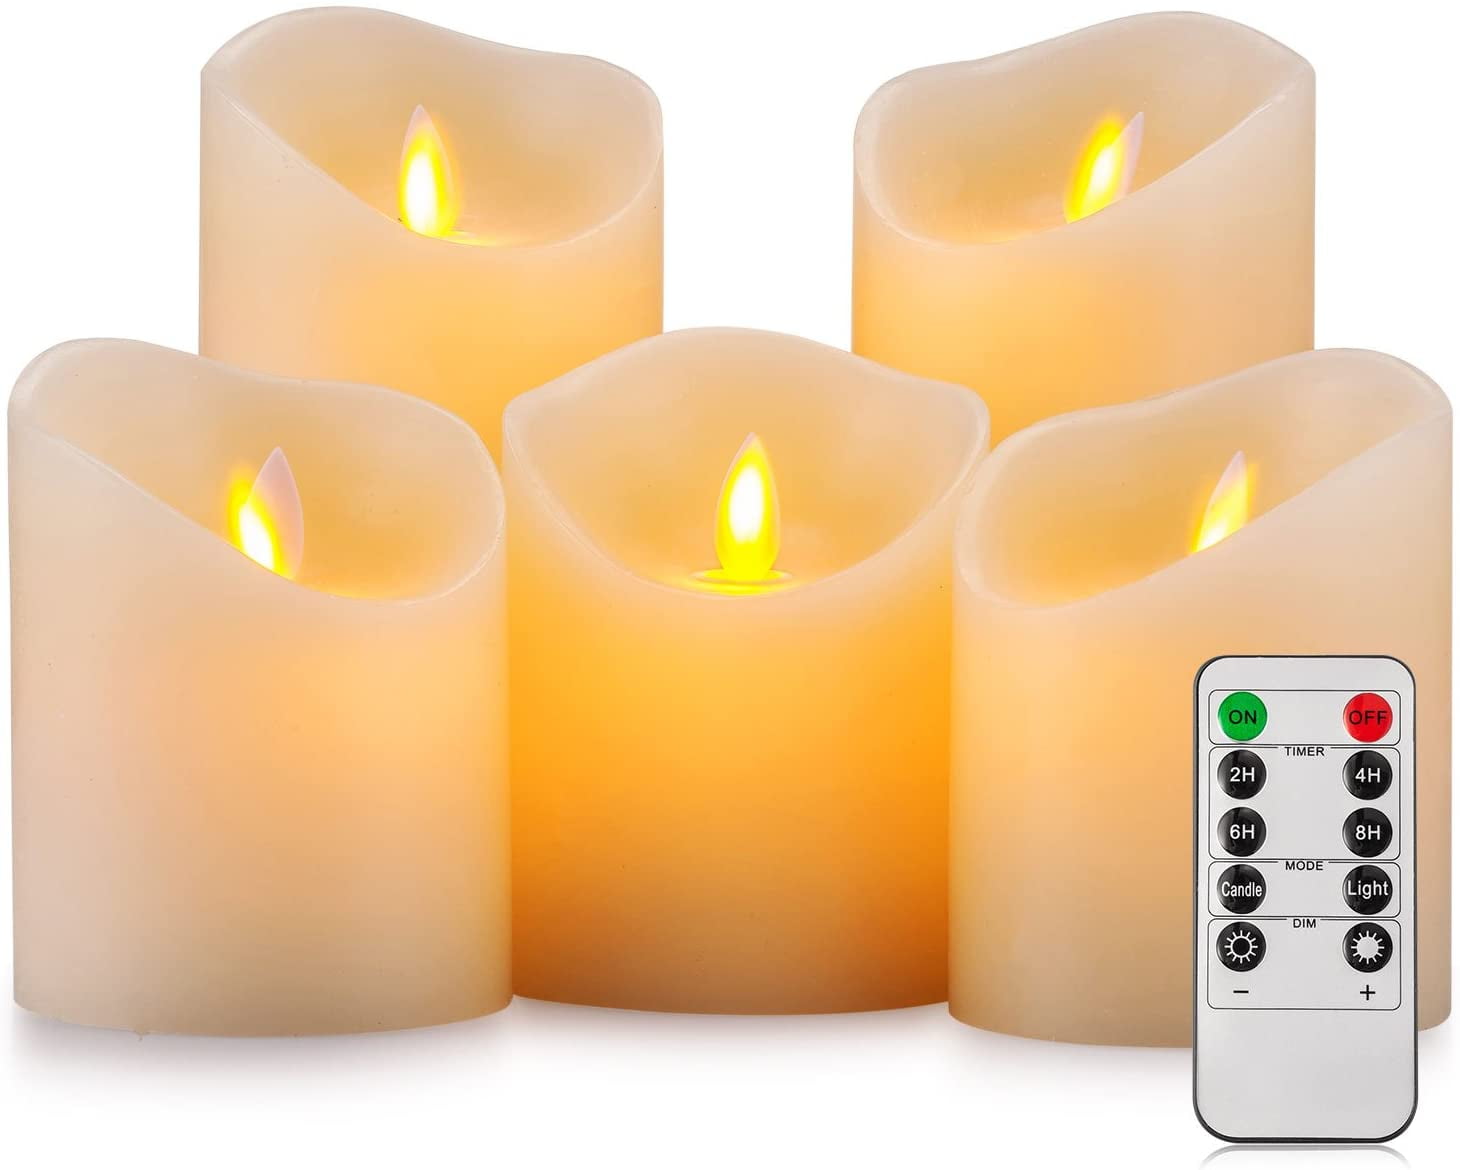 D:3.25 X H:4 5 6 Aongray LED Maple Leaf Candle Lights Pack of 3 Flameless Candles Battery Operated Pillar Real Wax Flickering Moving Wick Electric Candle Set with 10 Key Remote Control